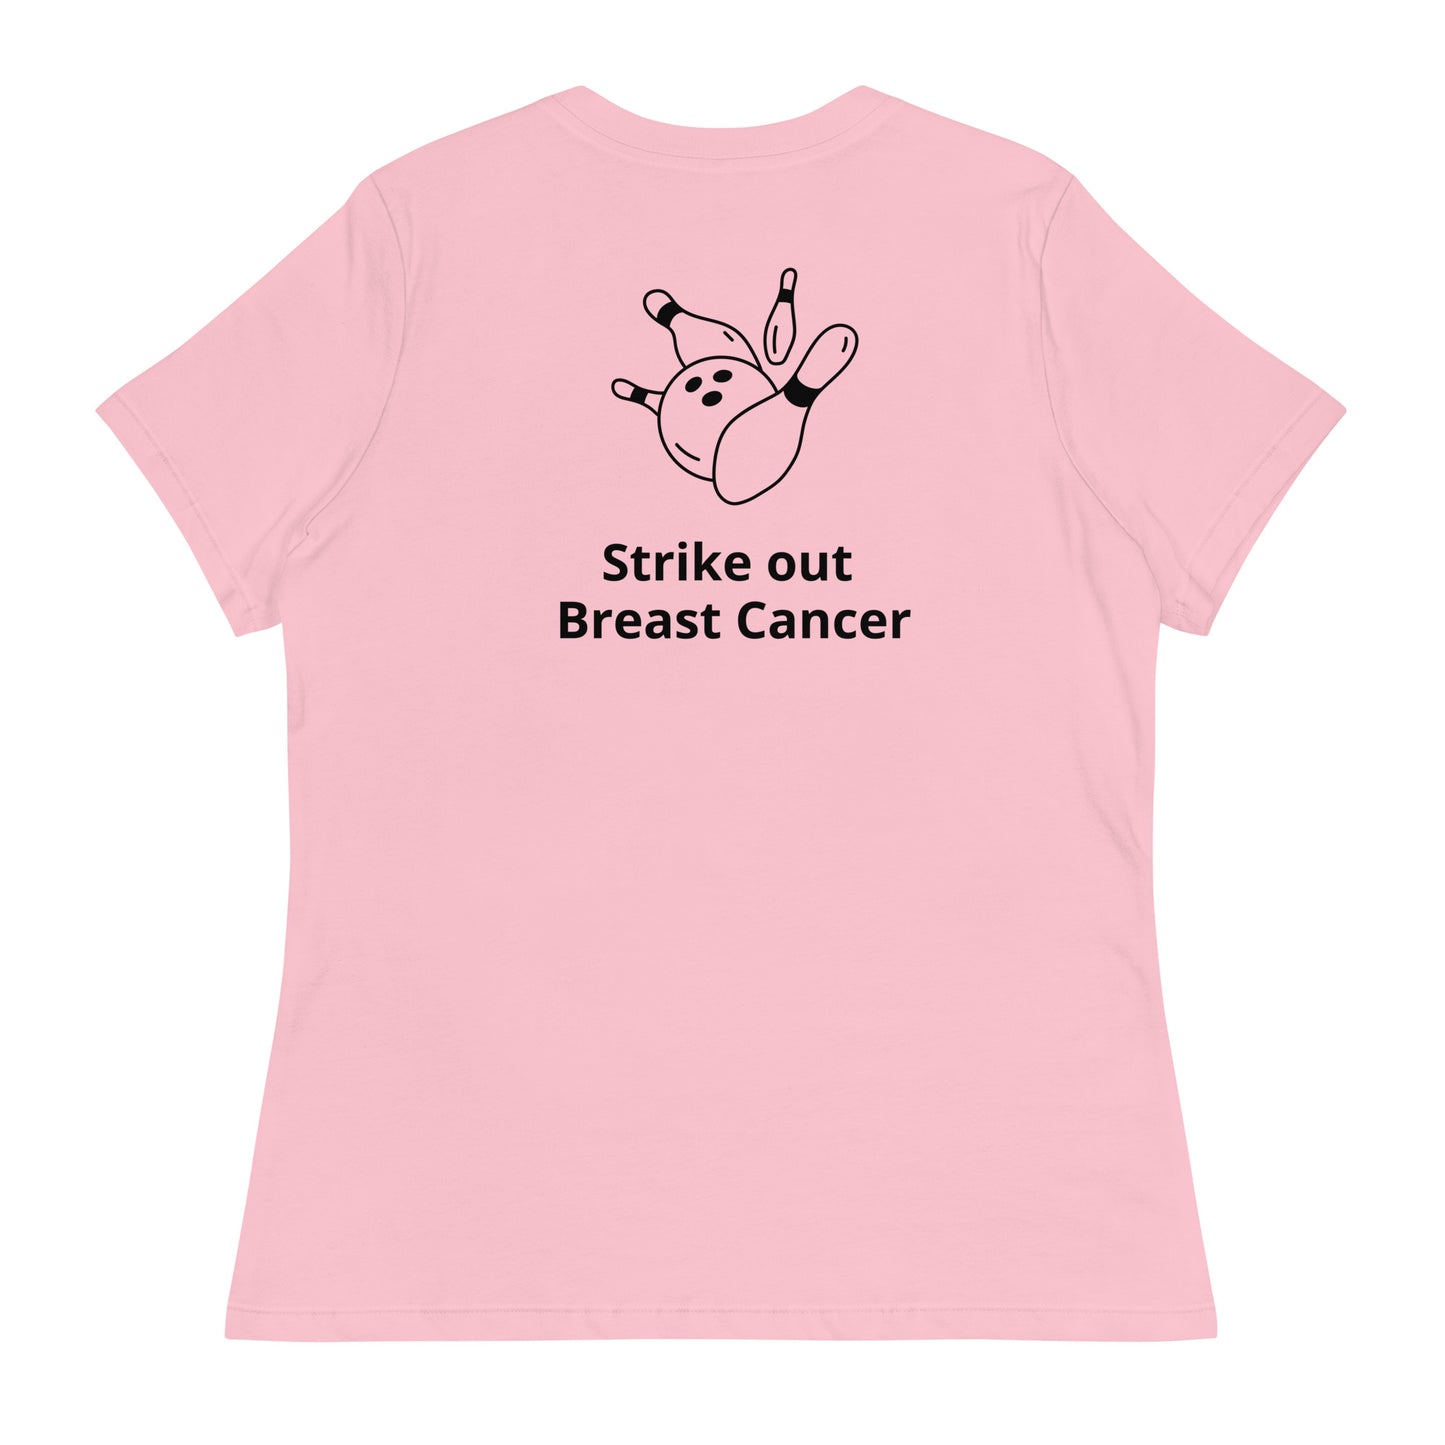 Strike out cancer